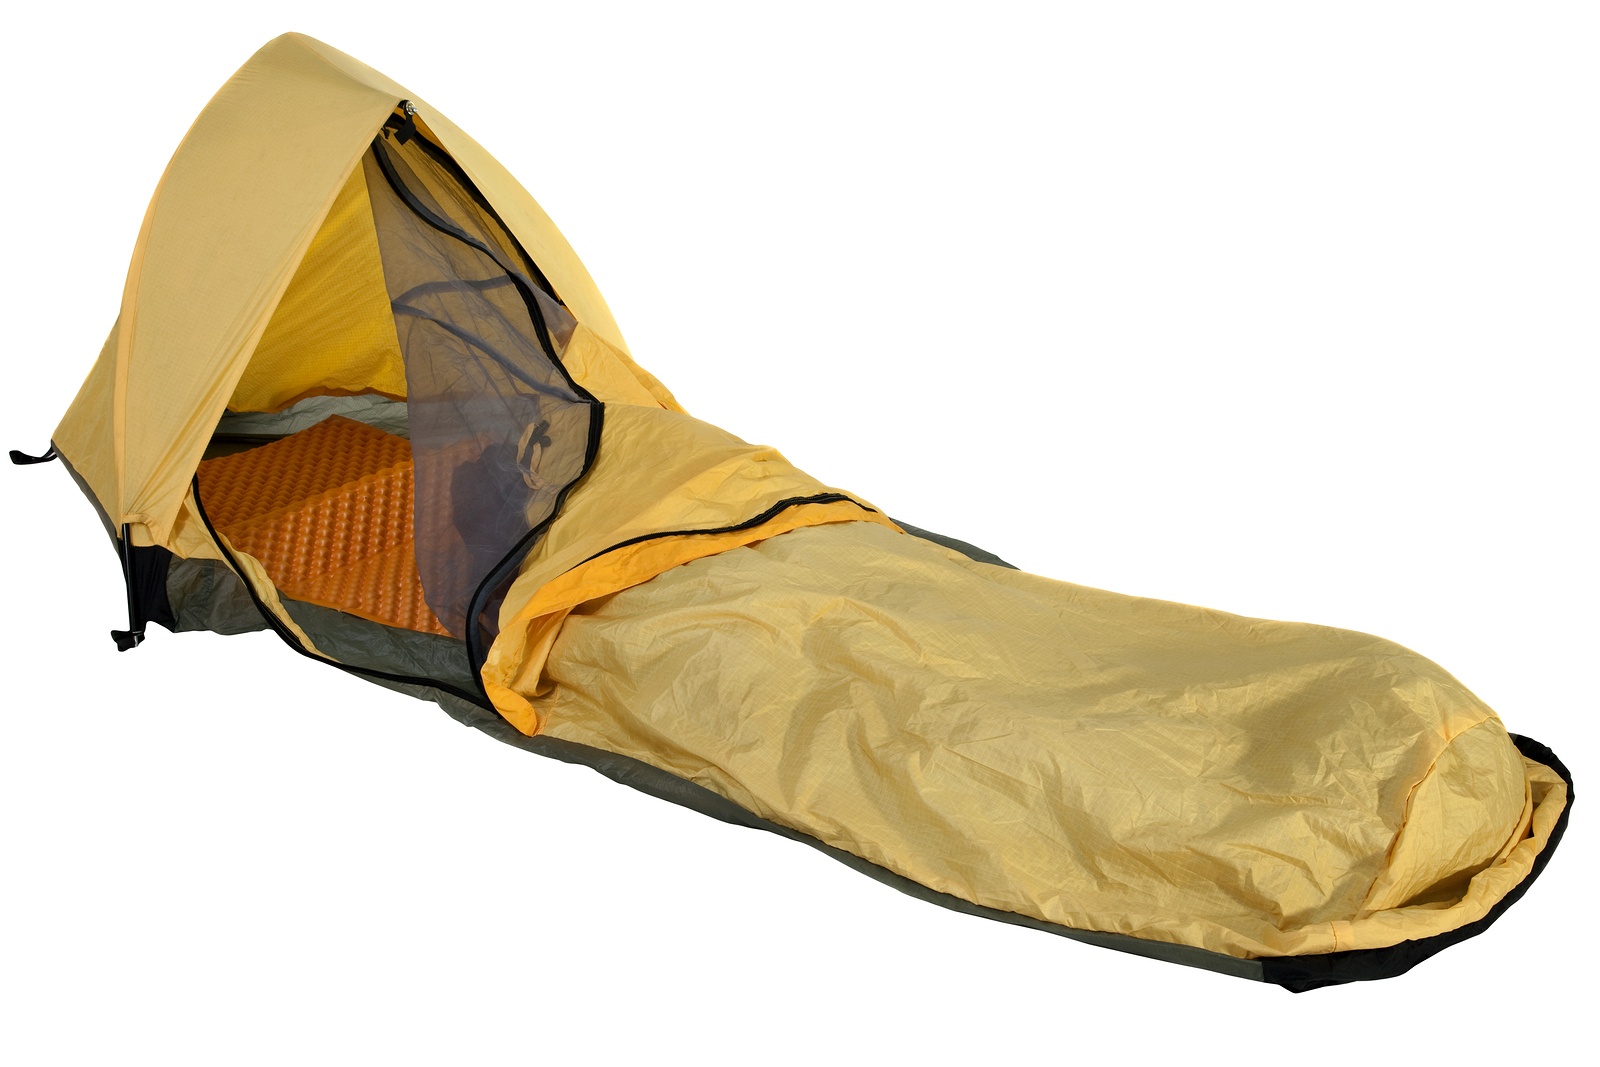 yellow bivy sack for minimalist solo expedition camping open entry with mosquito net foam sleeping pad inside isolated on white with clipping path